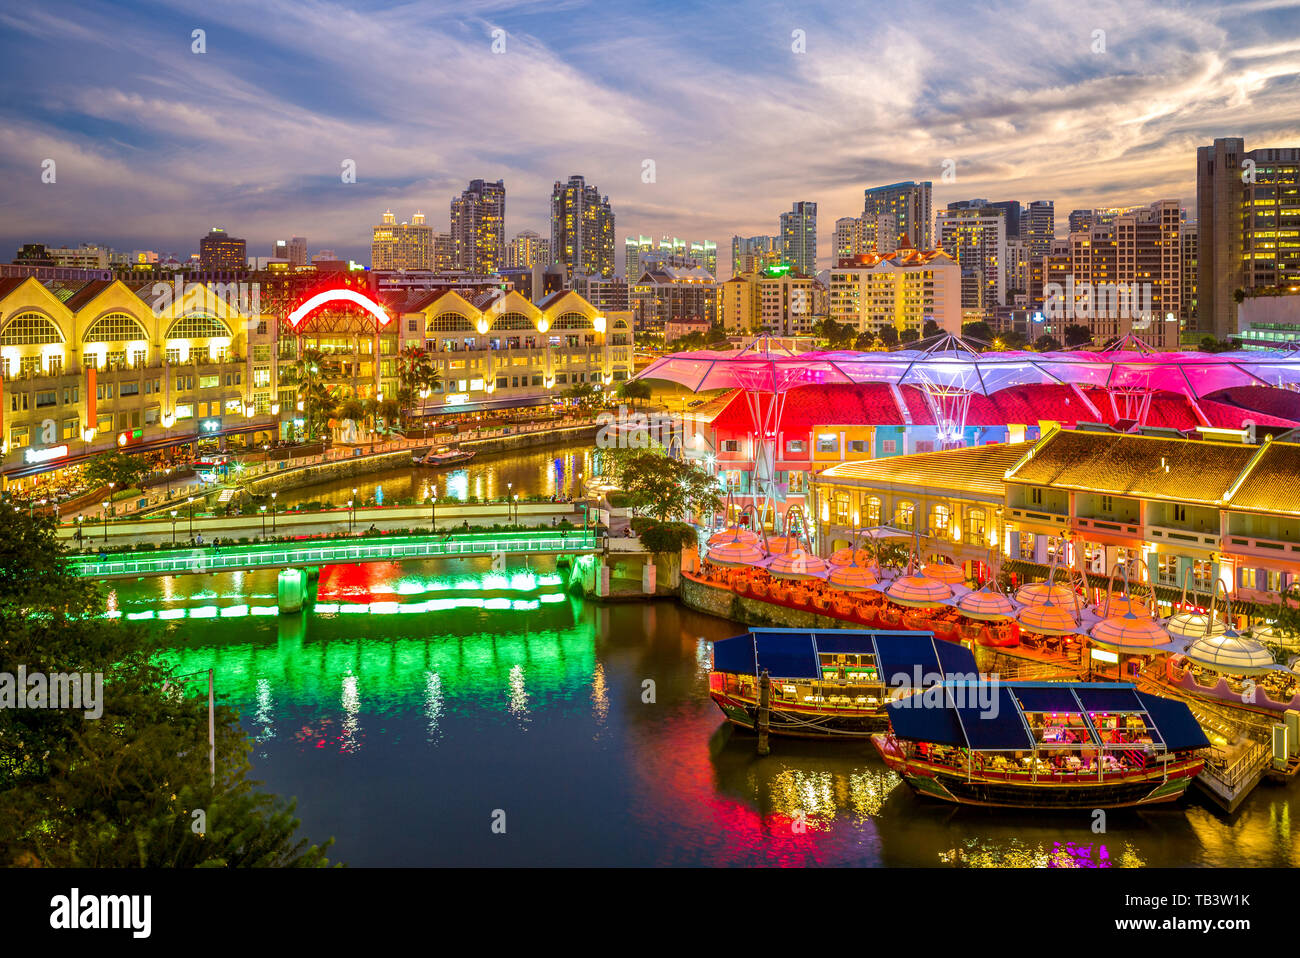 aerial view of Clarke Quay in singapore at night Stock Photo